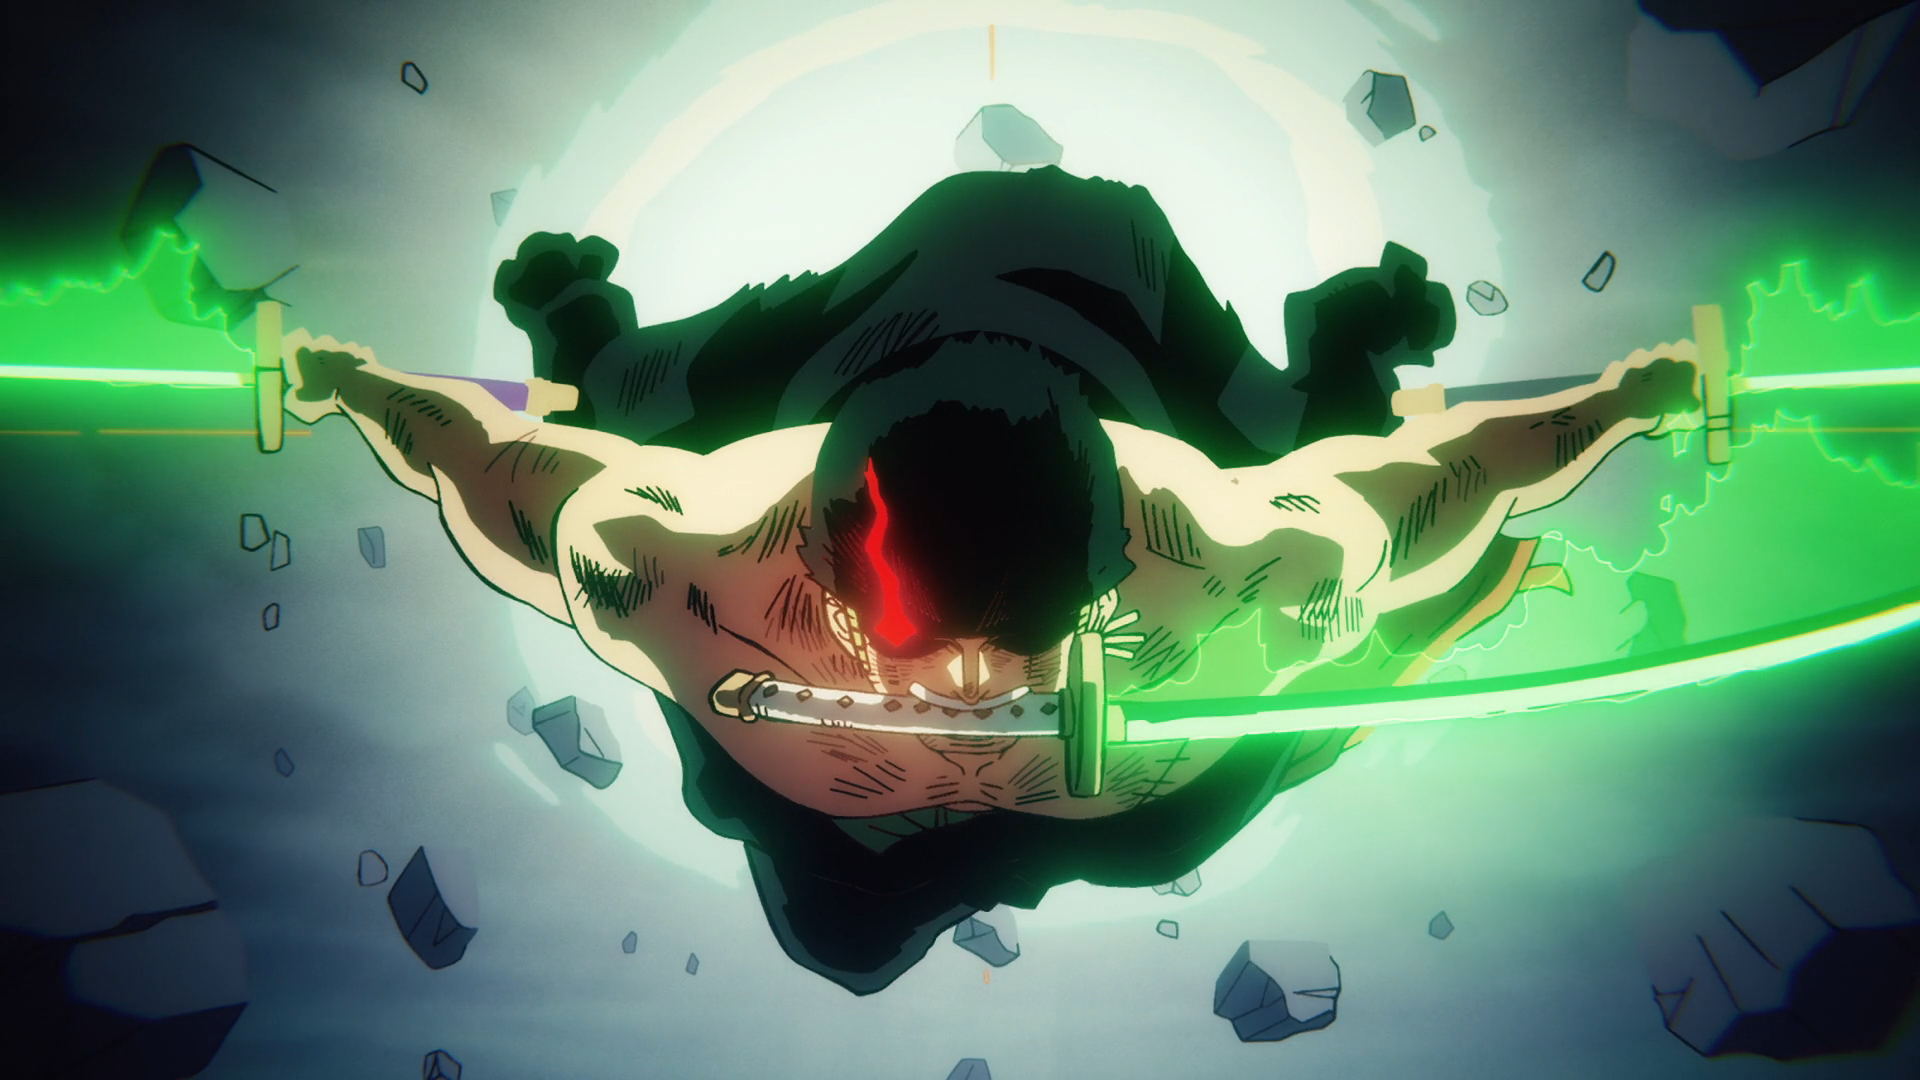 What I love most about Ep 1062 is how much it elevates the scale of the  fight and strength of the fighters, especially King : r/OnePiece